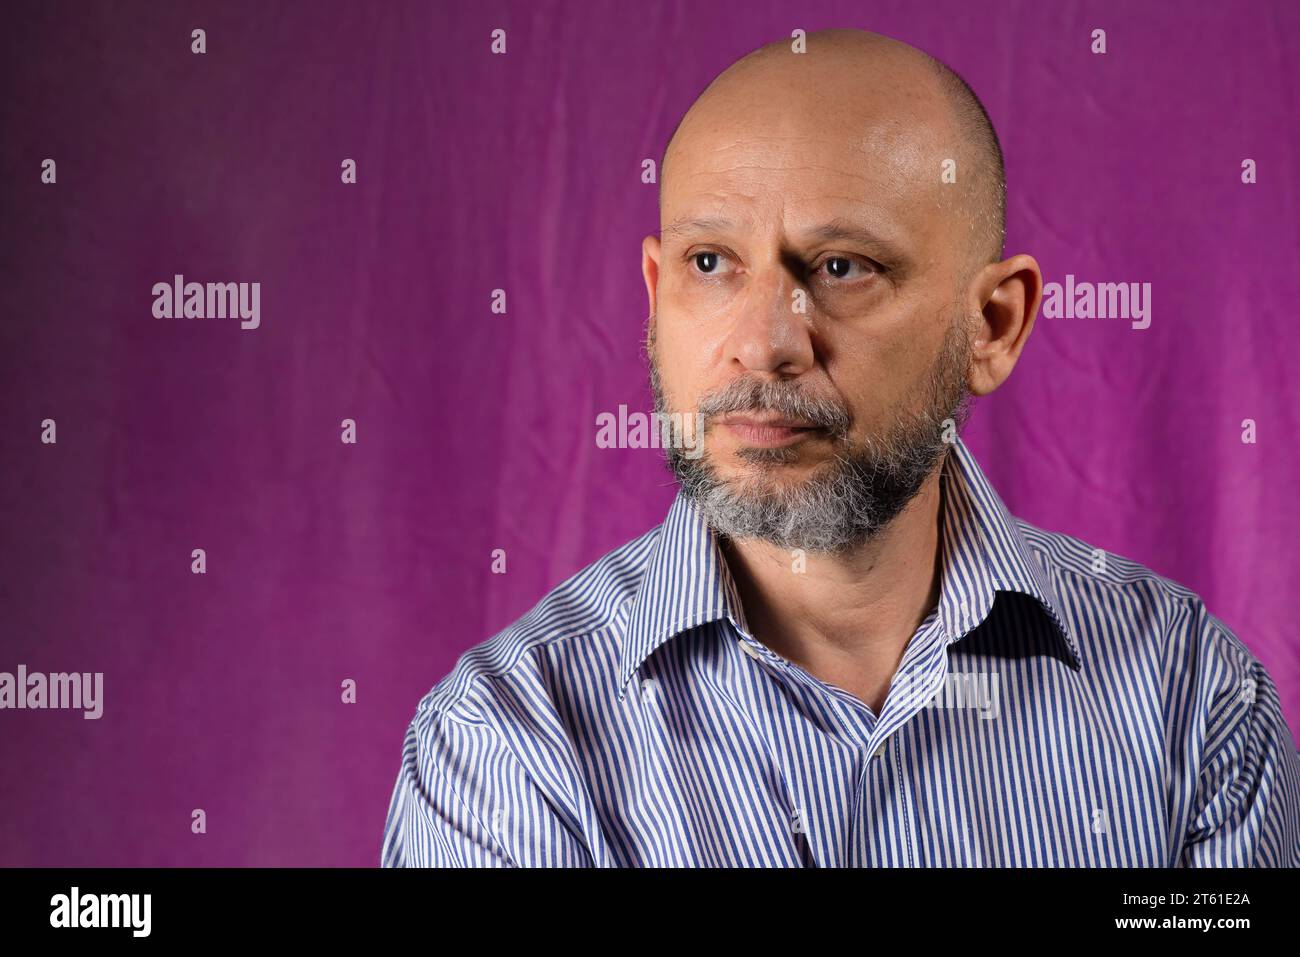 Bald, bearded man looking at camera against pink background. Stock Photo